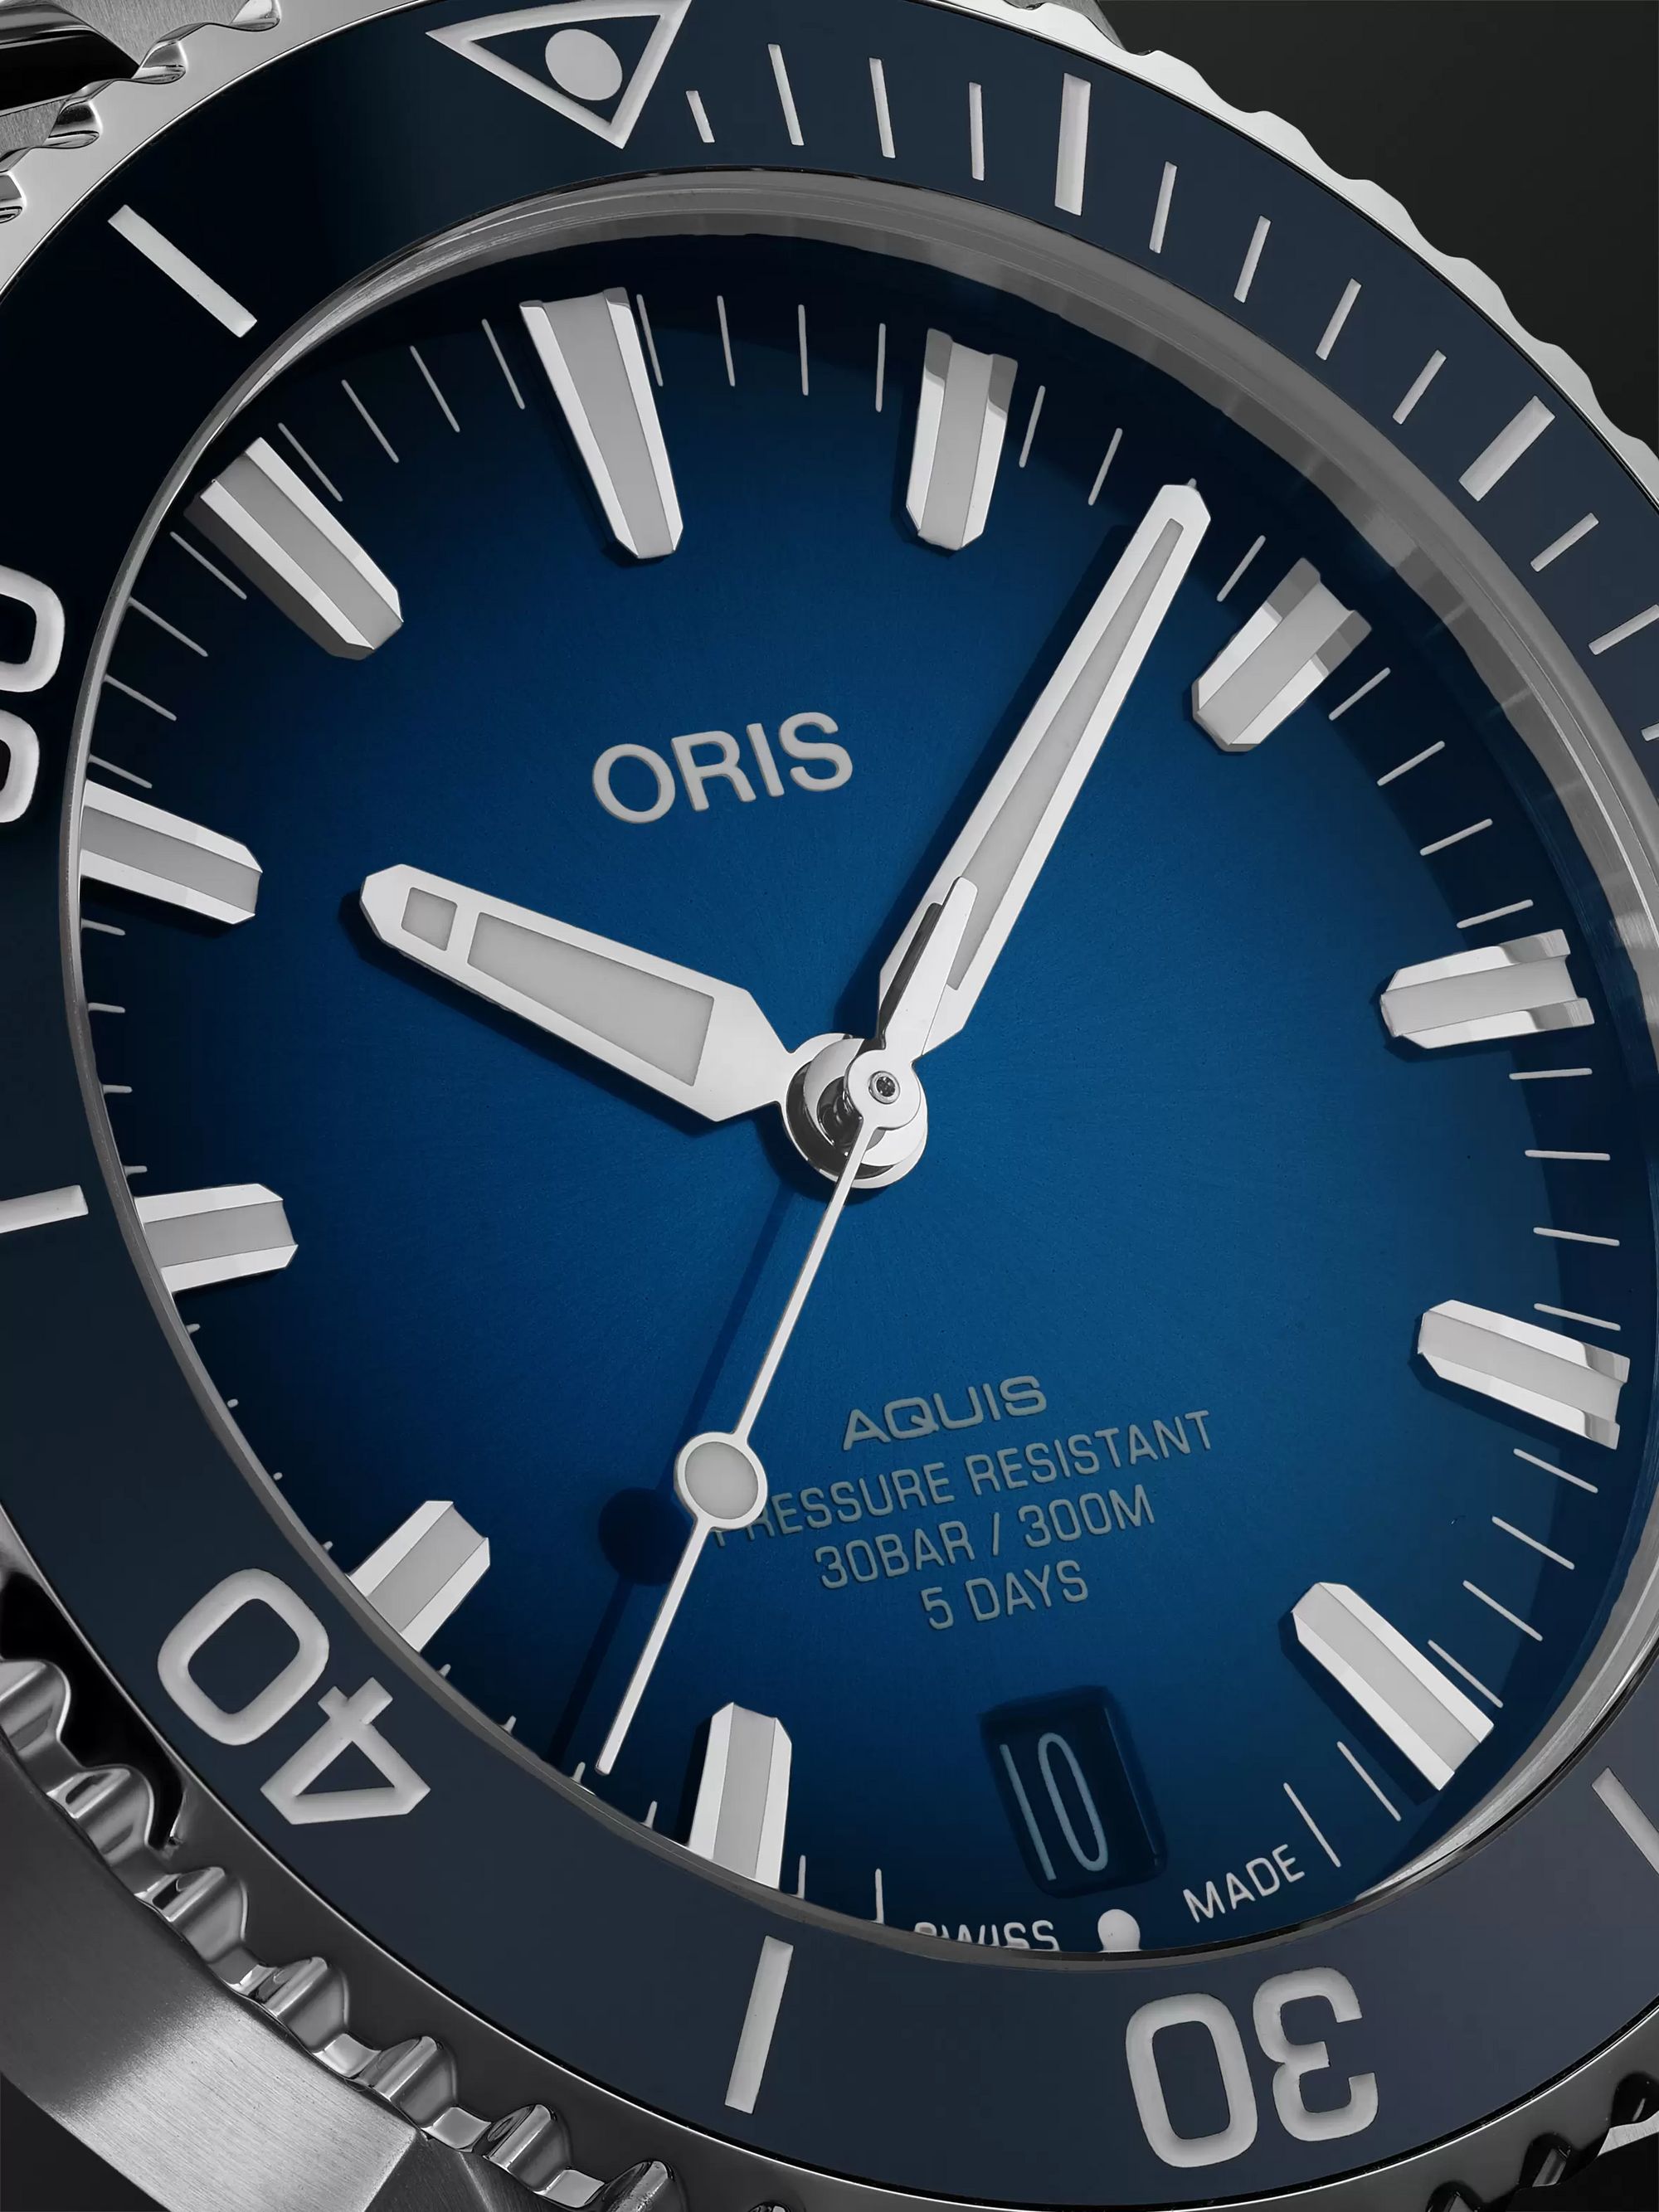 ORIS Aquis Date Calibre 400 Automatic 43.5mm Stainless Steel Watch, Ref. No. 01 400 7763 4135-07 8 24 09PEB